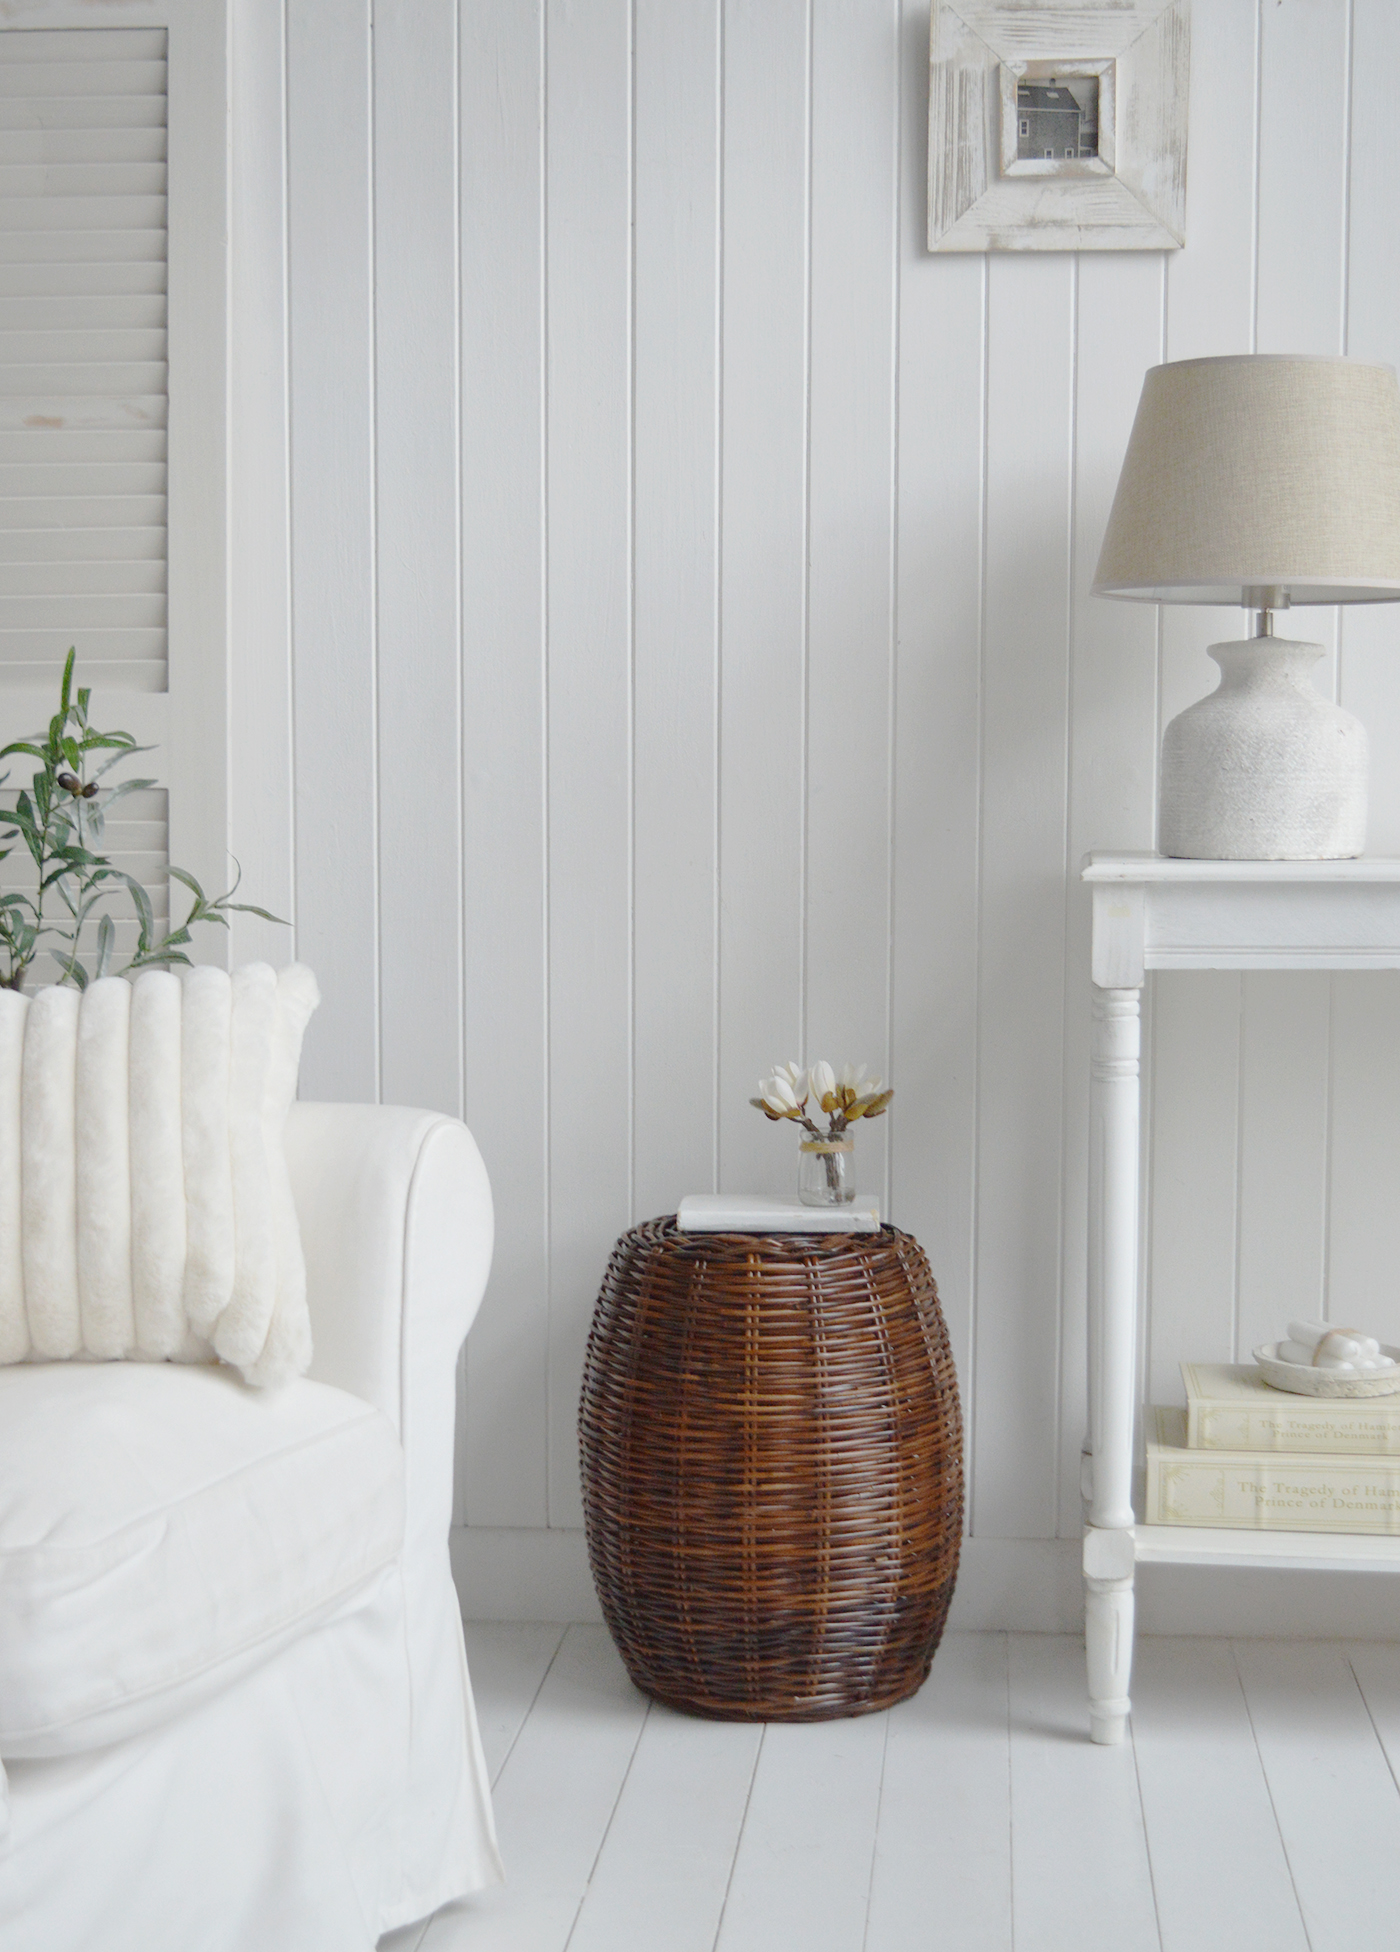 Bethel Cove Rattan stool, Seat or side table - Coastal New England and Hamptons Furniture - shown in a white living room